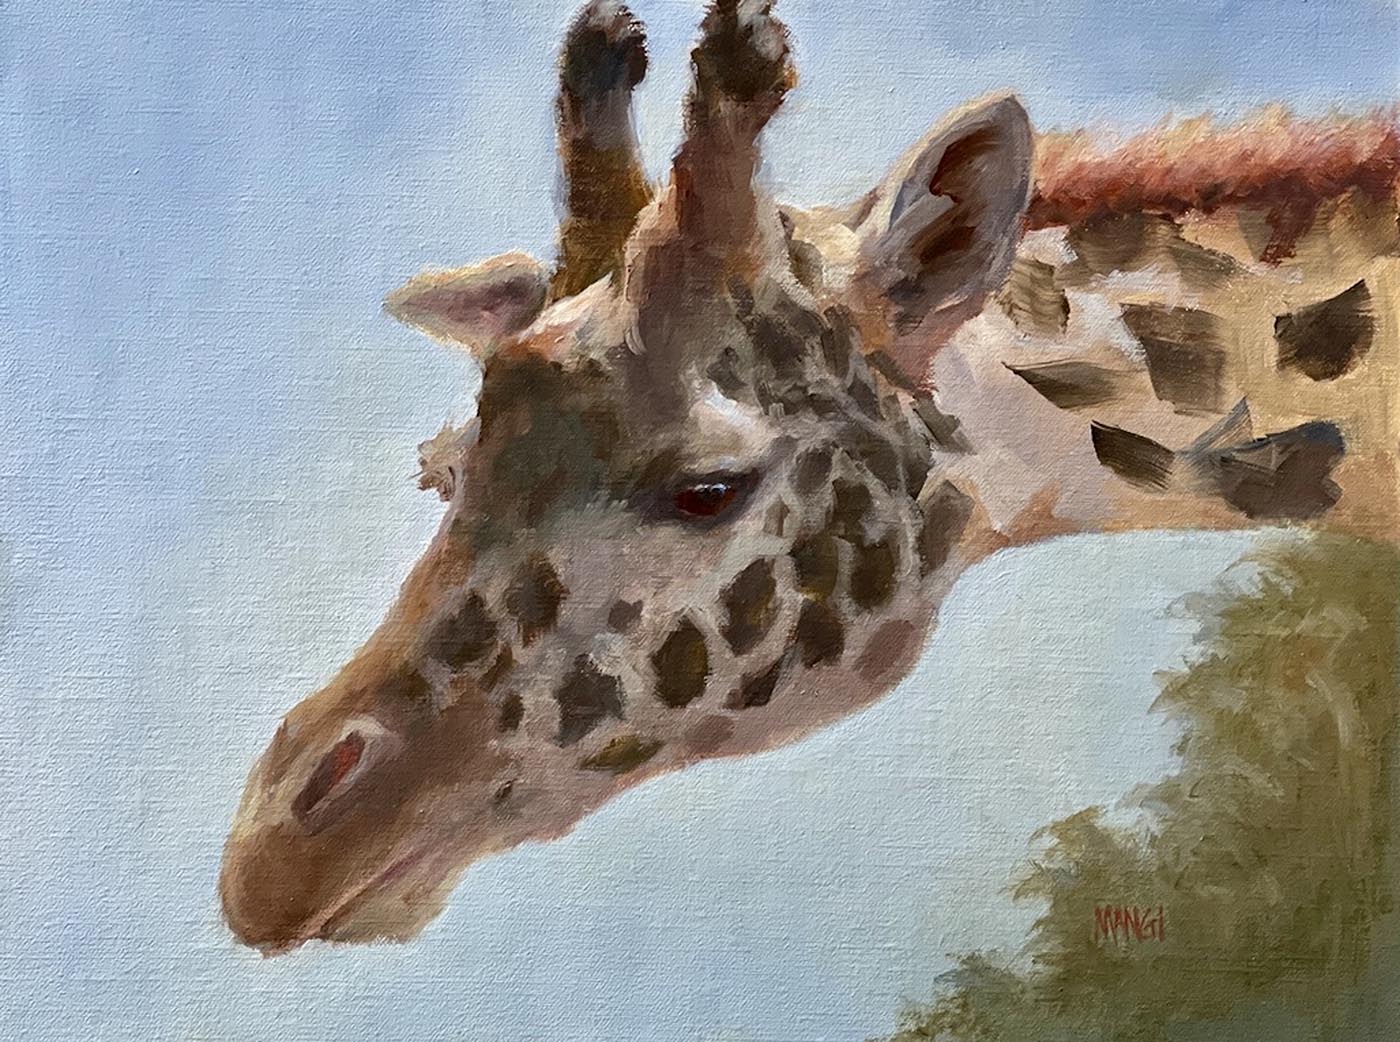 oil painting of head shot of a giraffe taking up most of the painting